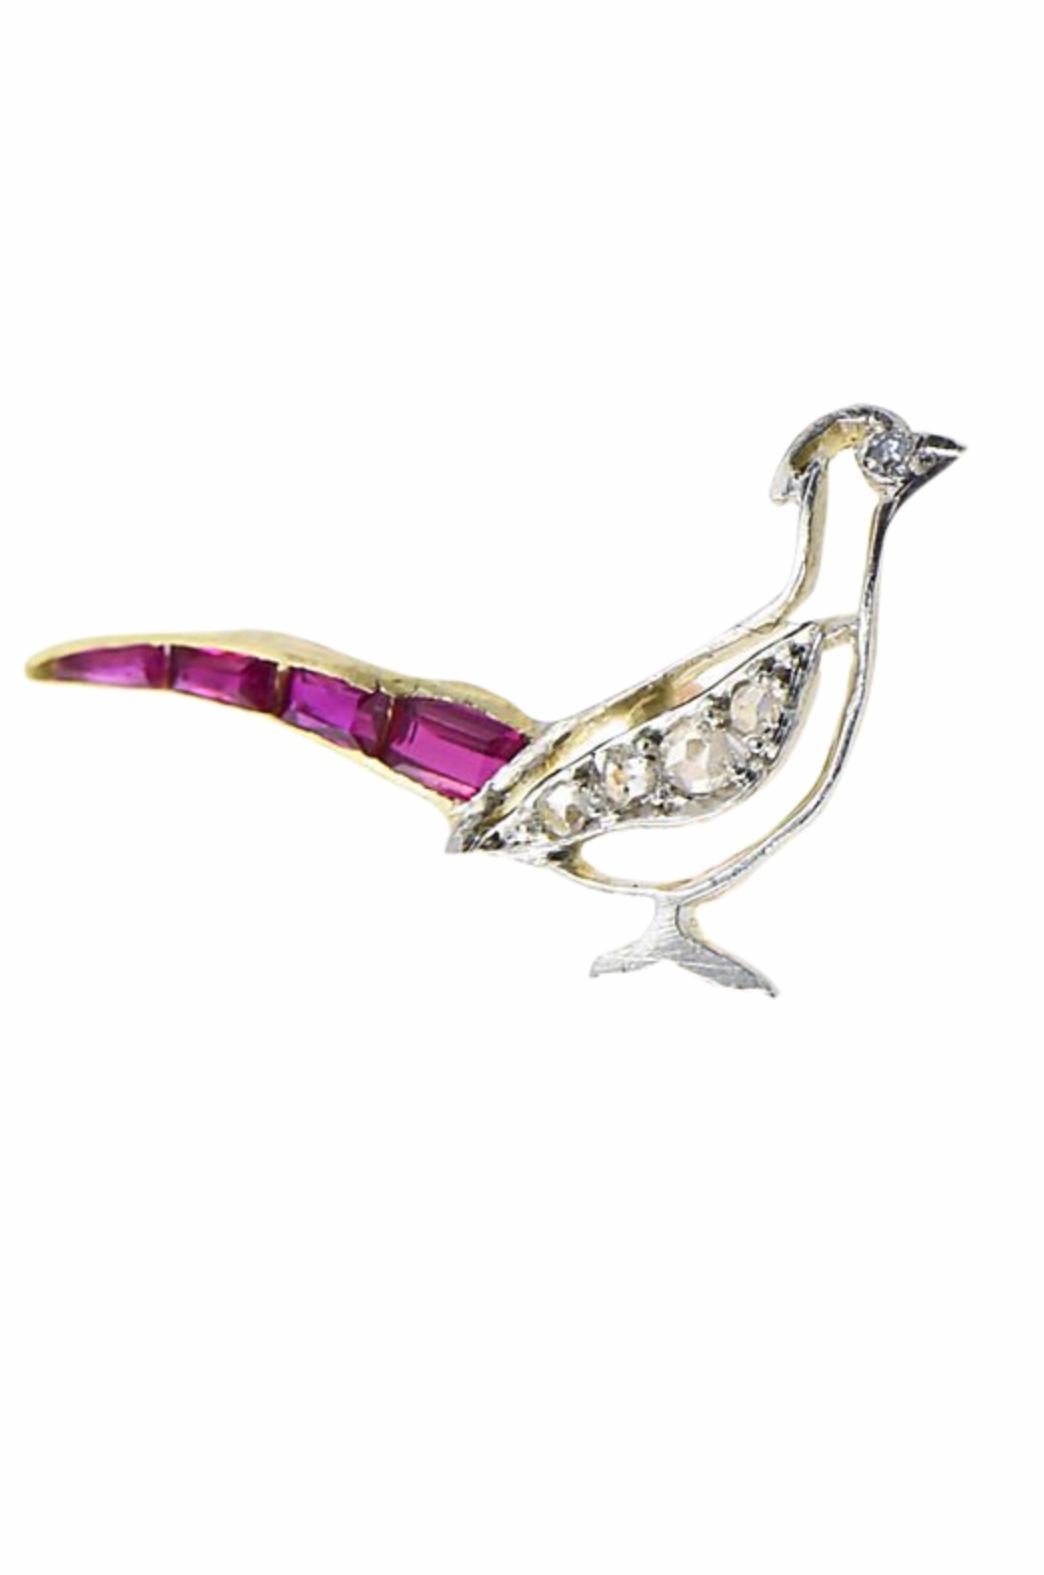 Antique French 18K gold stickpin featuring channel-set synthetic ruby tail and diamond body mounted in gold. Marked with a French eagle hallmark on stickpin. Could be easily converted to a ring or pendant. 